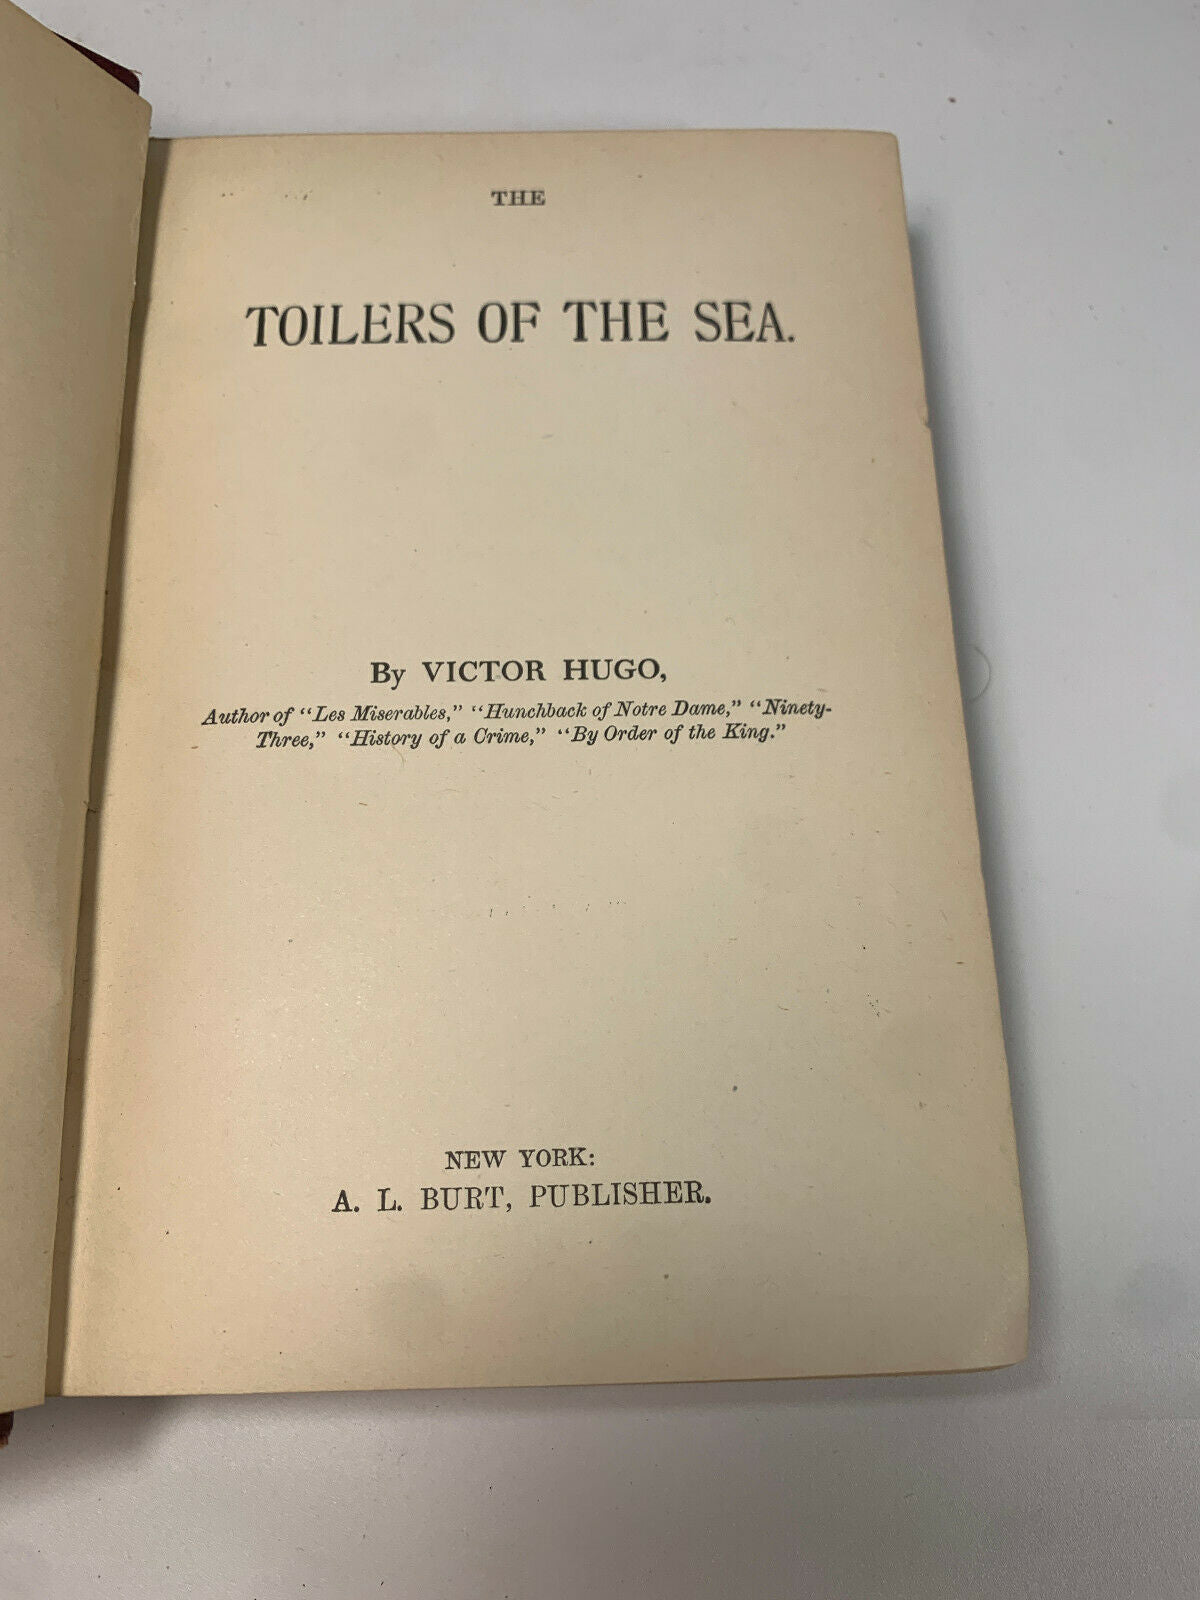 Toilers of the Sea by Victor Hugo, The Home Library